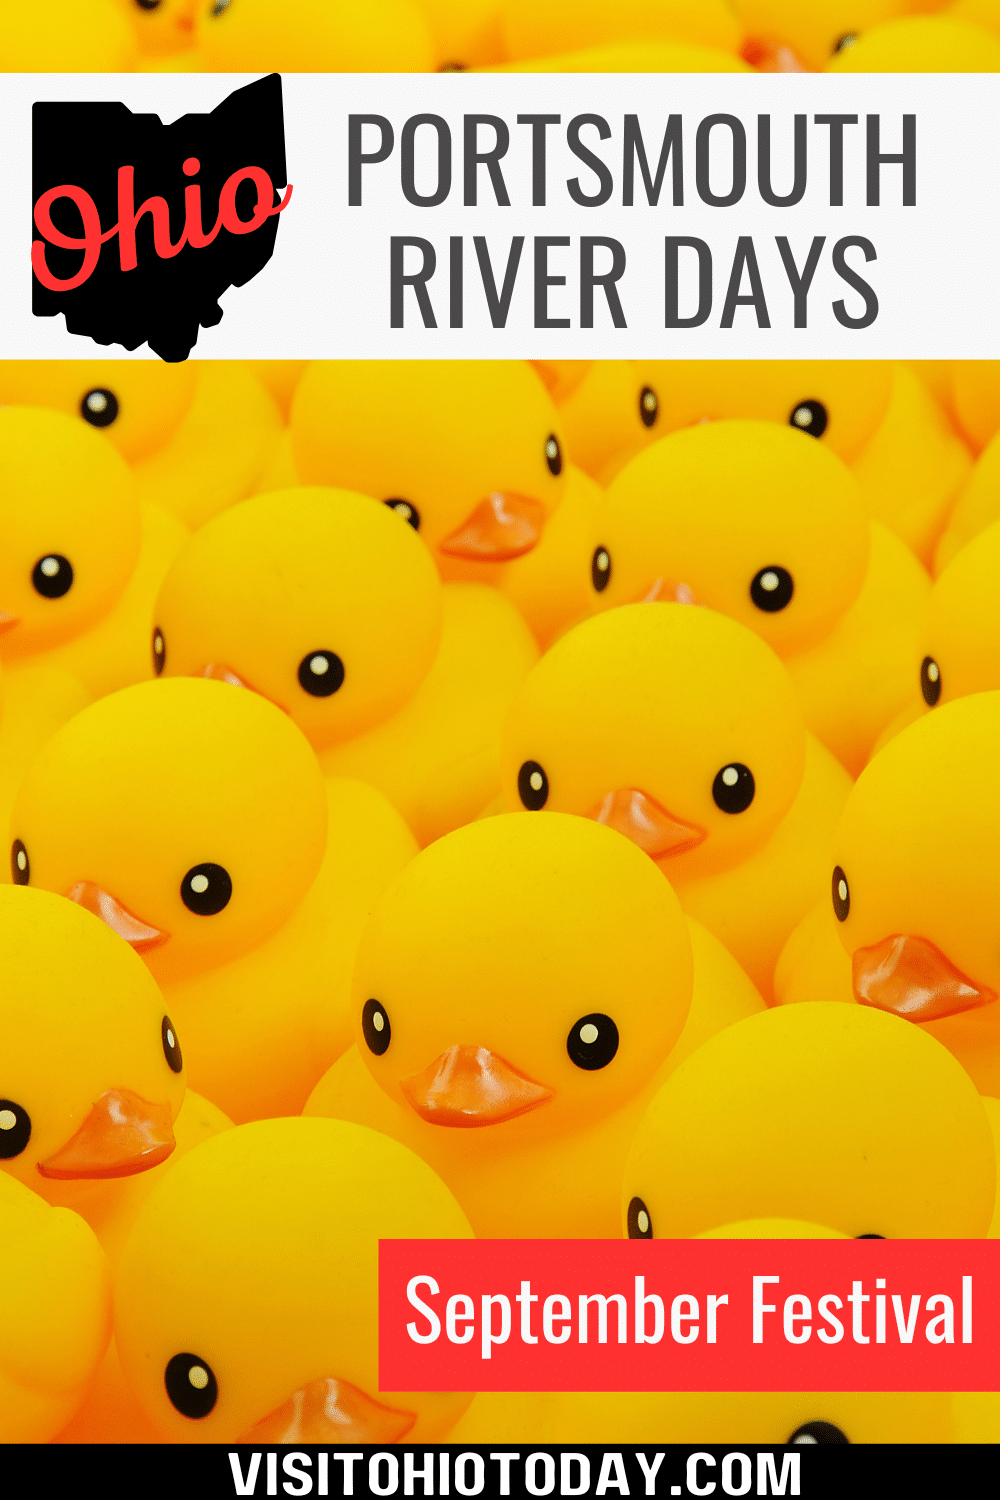 Portsmouth River Days takes place over Labor Day weekend – September 1-3, 2023. Three days of family fun and live music on the riverfront in Portsmouth and surrounding area.